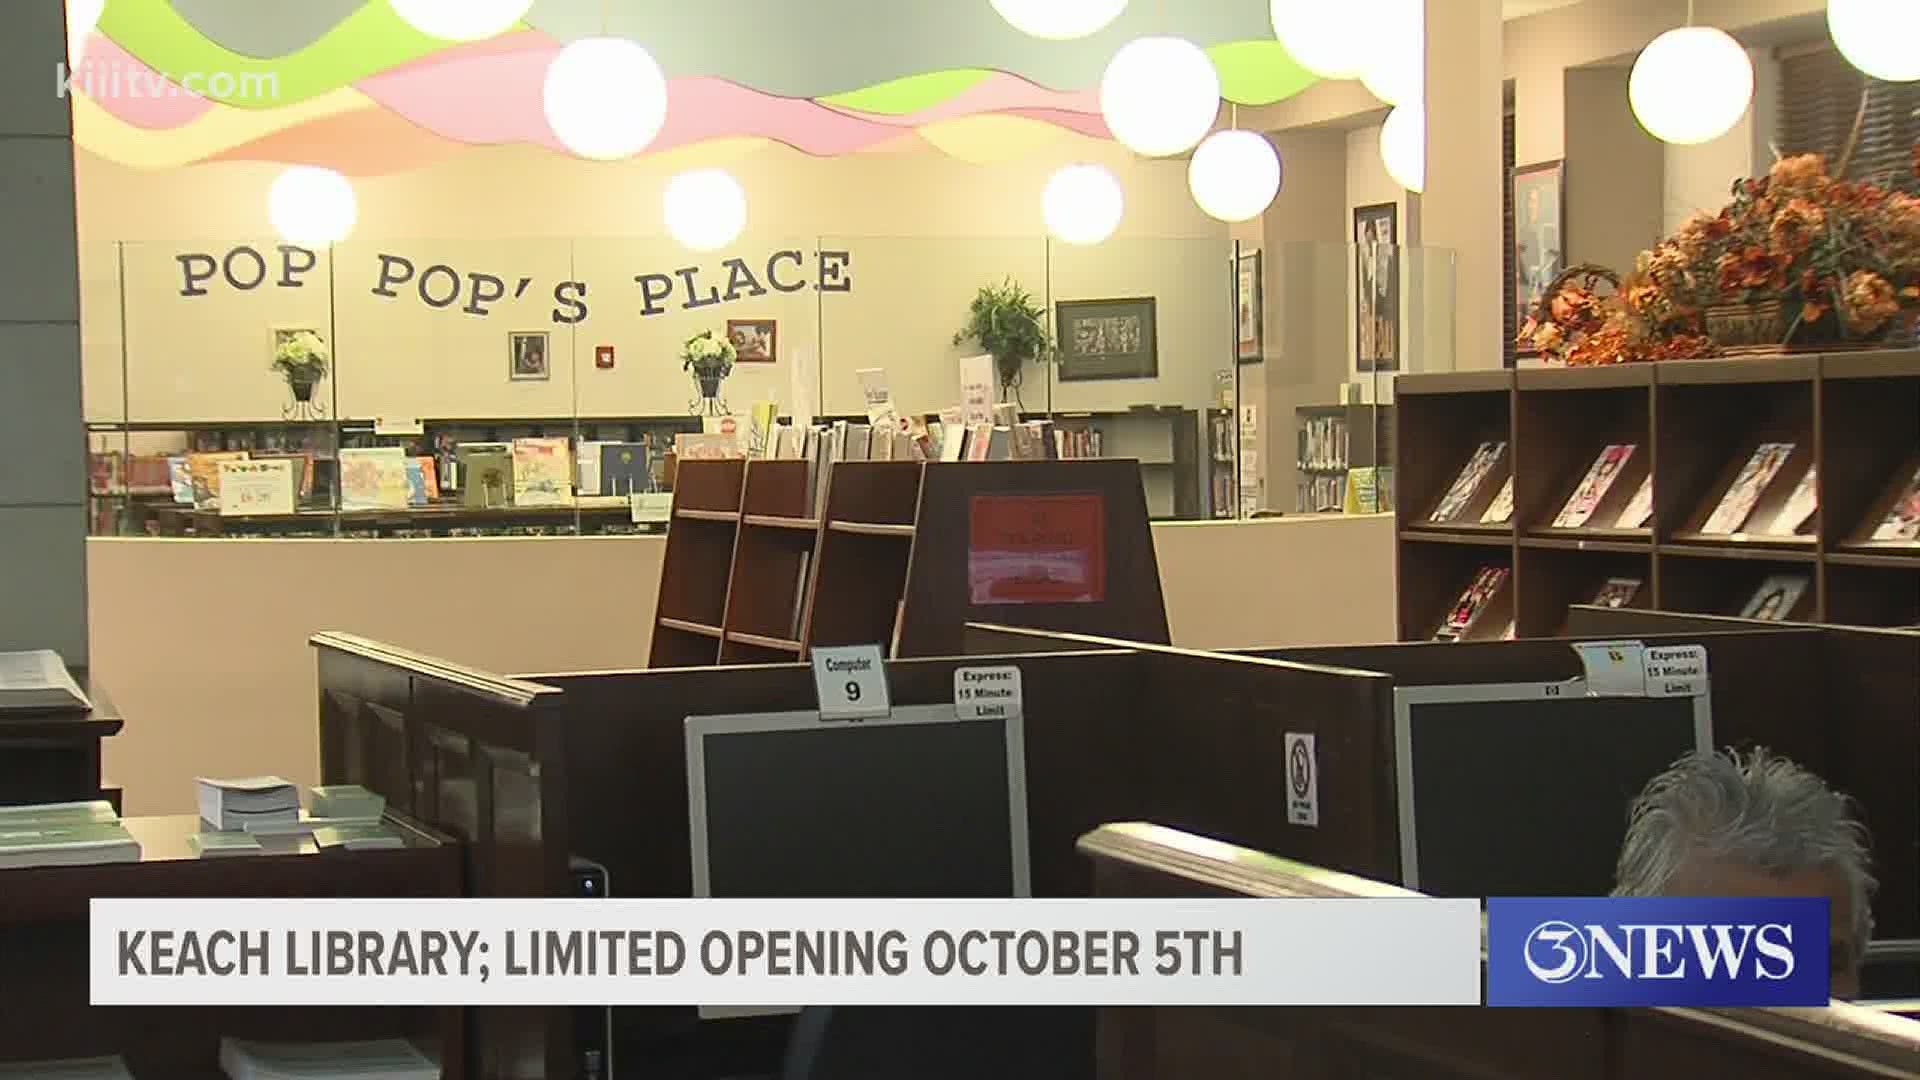 Visitors will be allowed to use computers, copiers, fax machines and pick up books curbside.